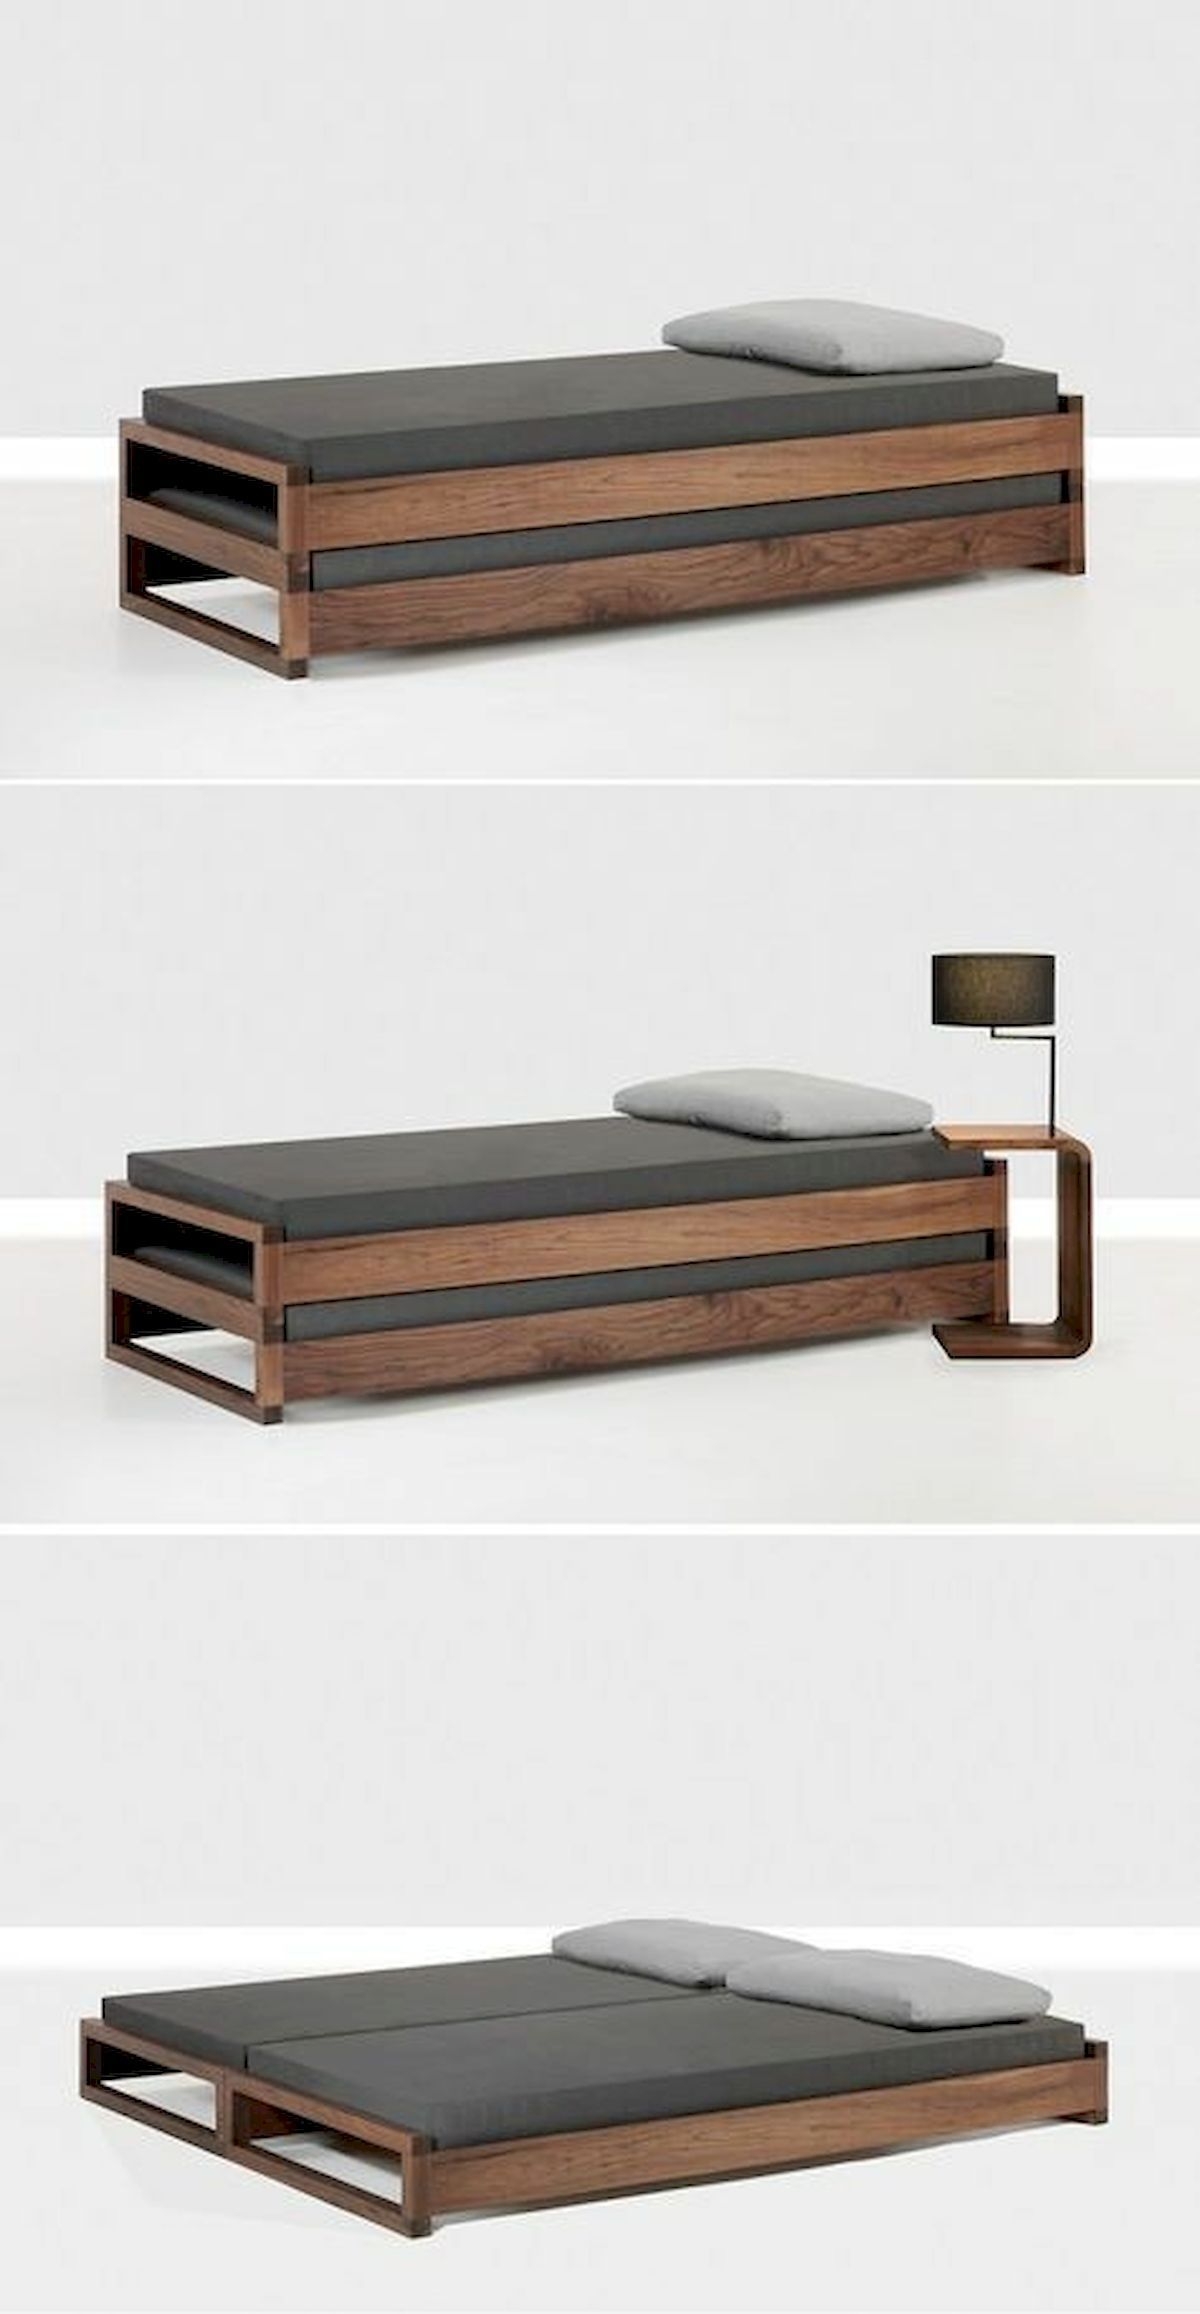 Space Saving Beds Visualhunt, Space Saver Twin Bed